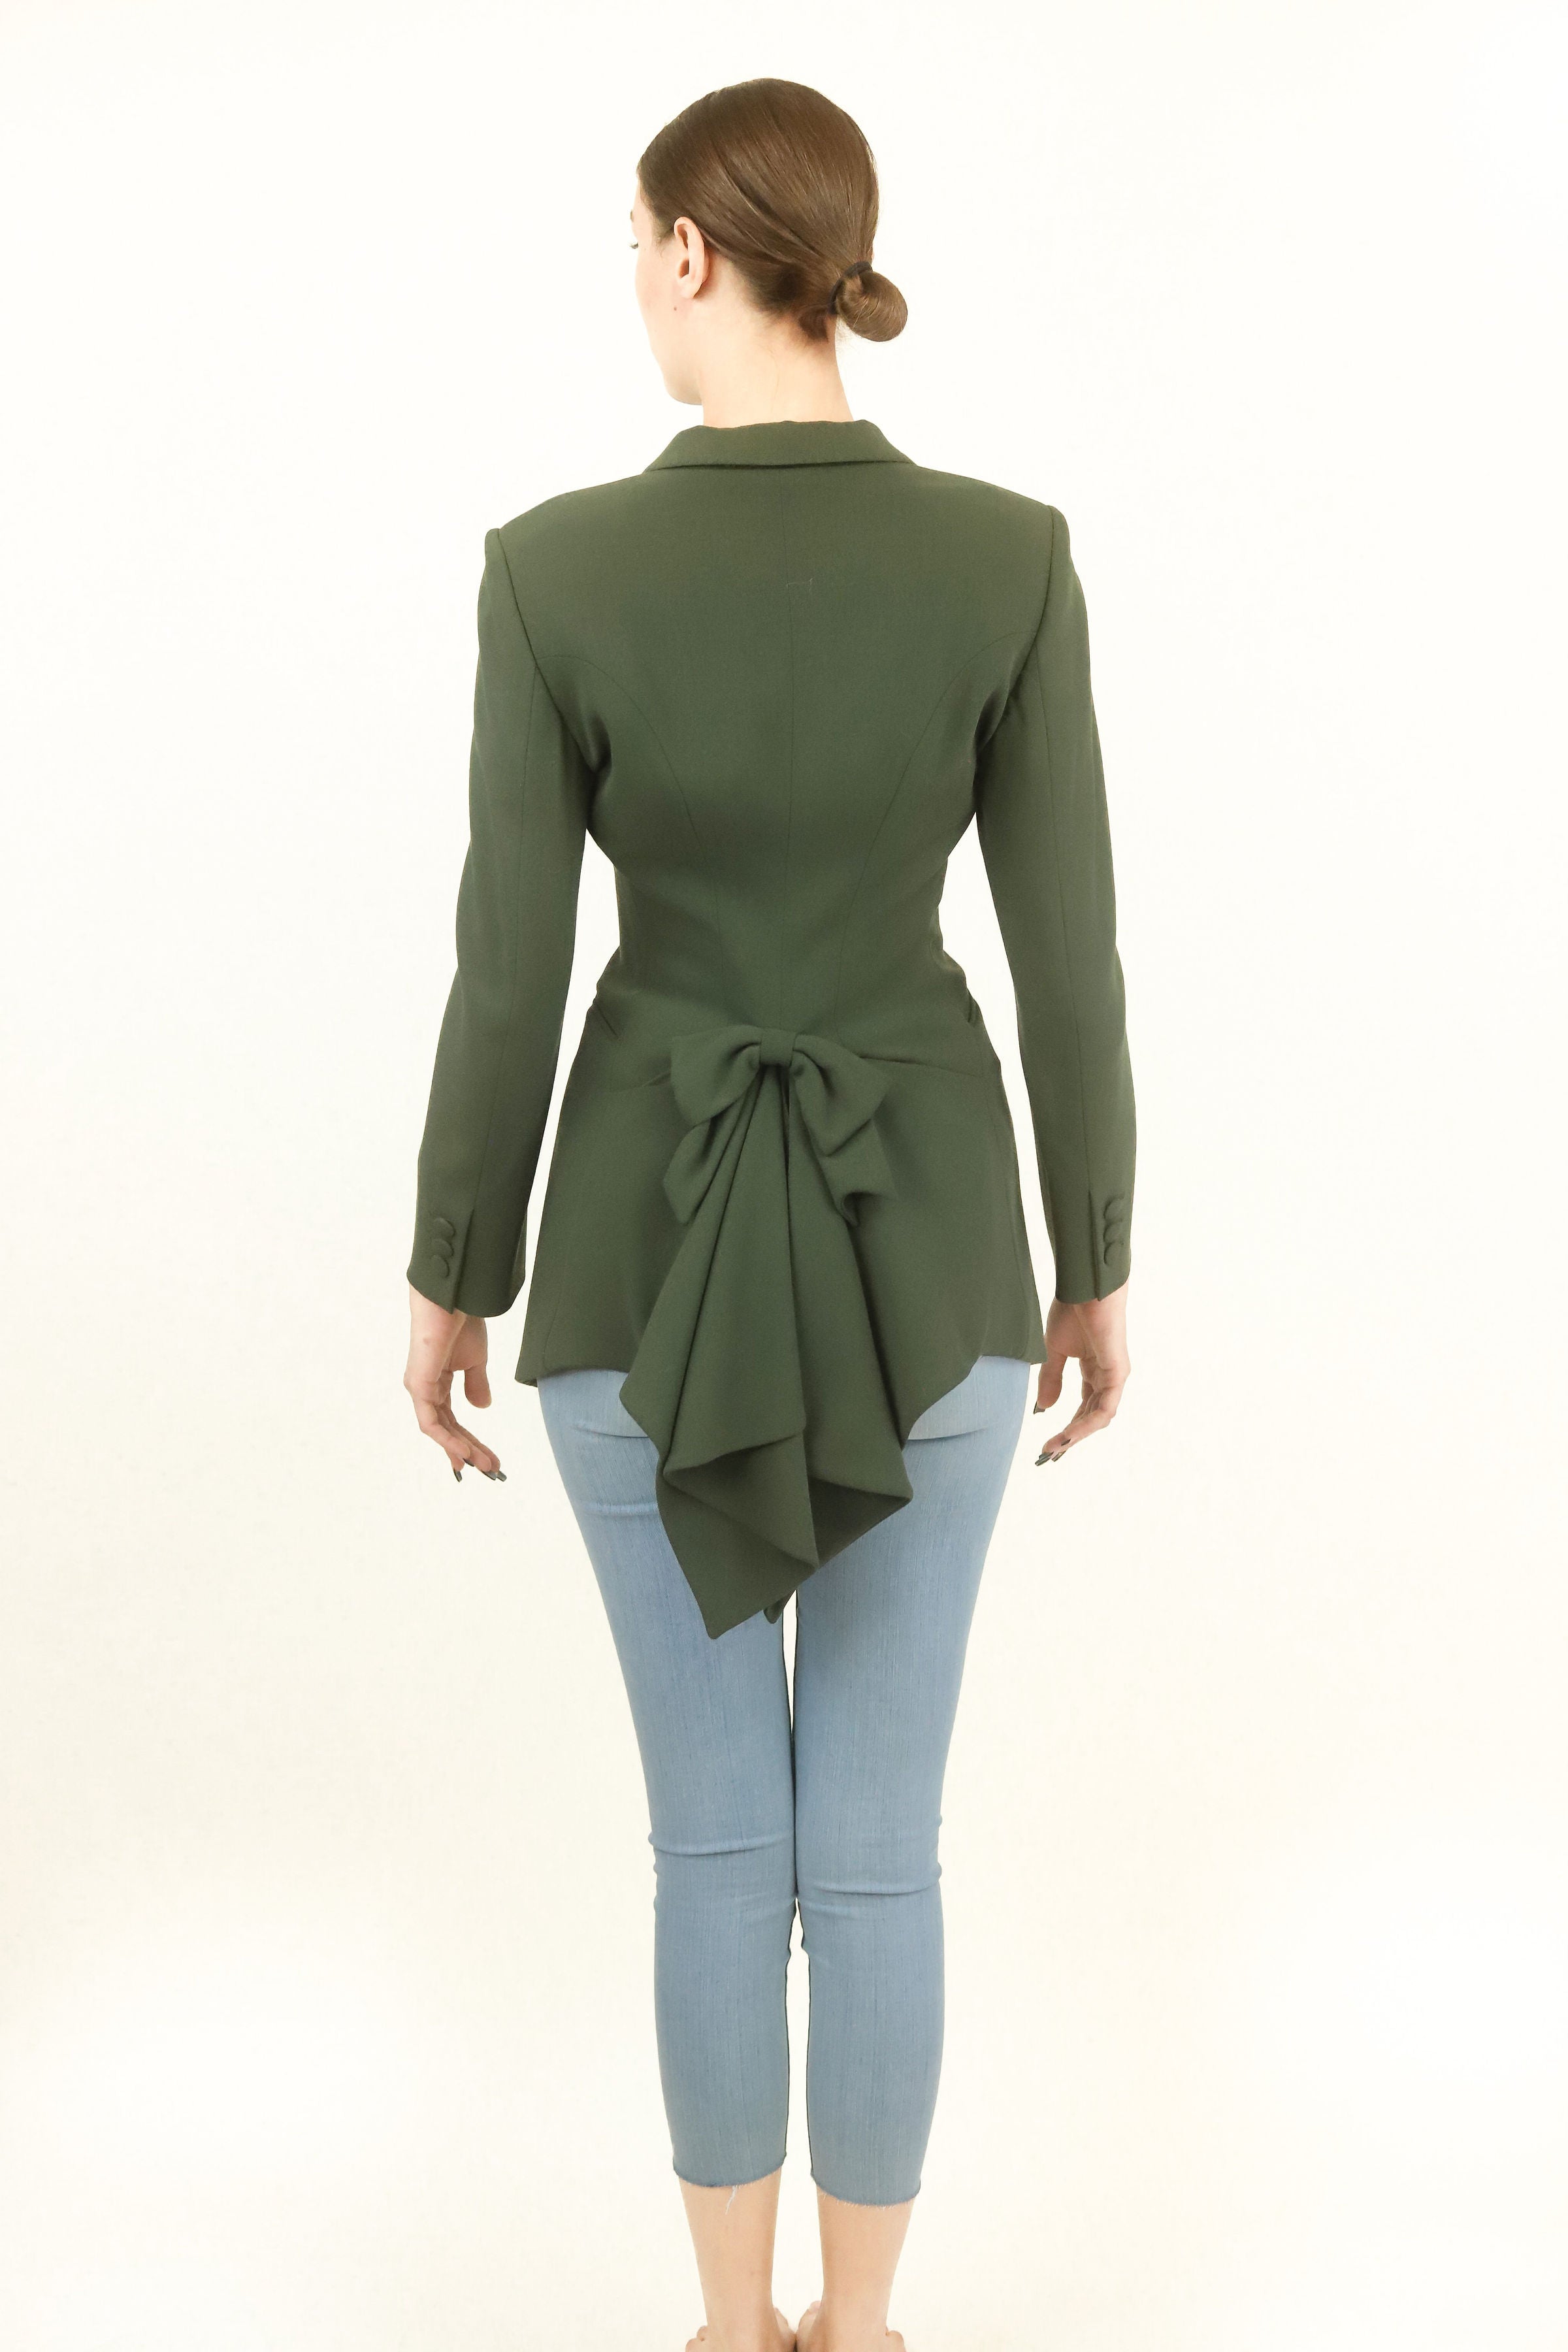 Moschino Couture Forest Green with Bow Blazer